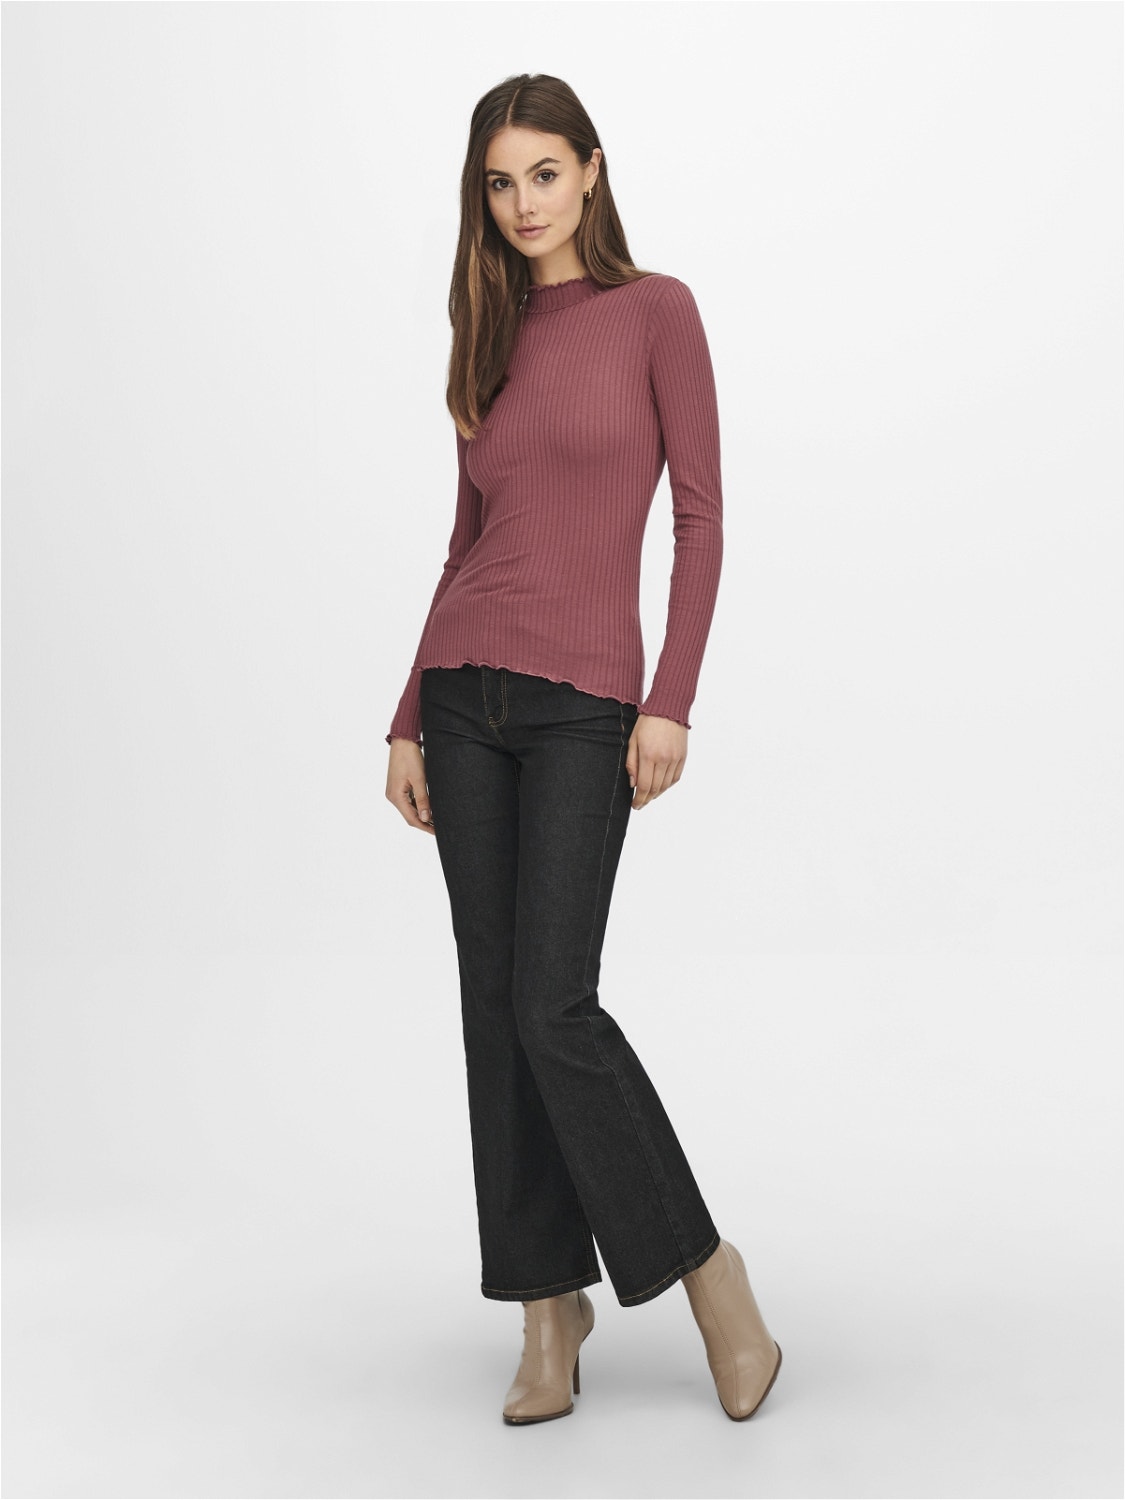 ONLY Long sleeved Top -Woodrose - 15228065